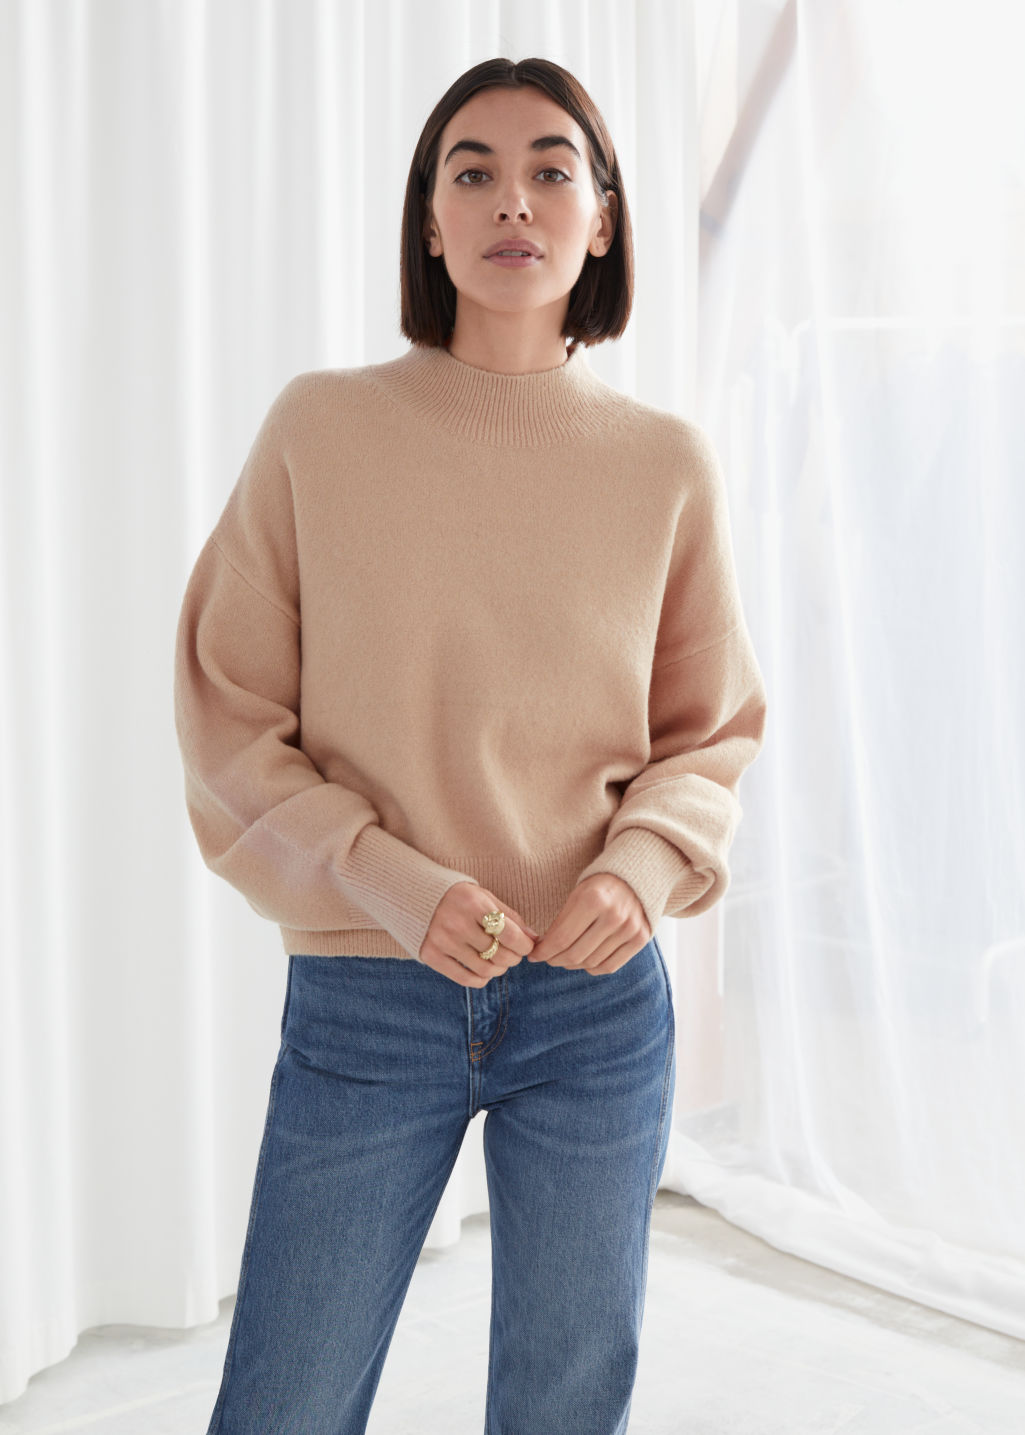 Mock Neck Sweater - Green - Sweaters - & Other Stories